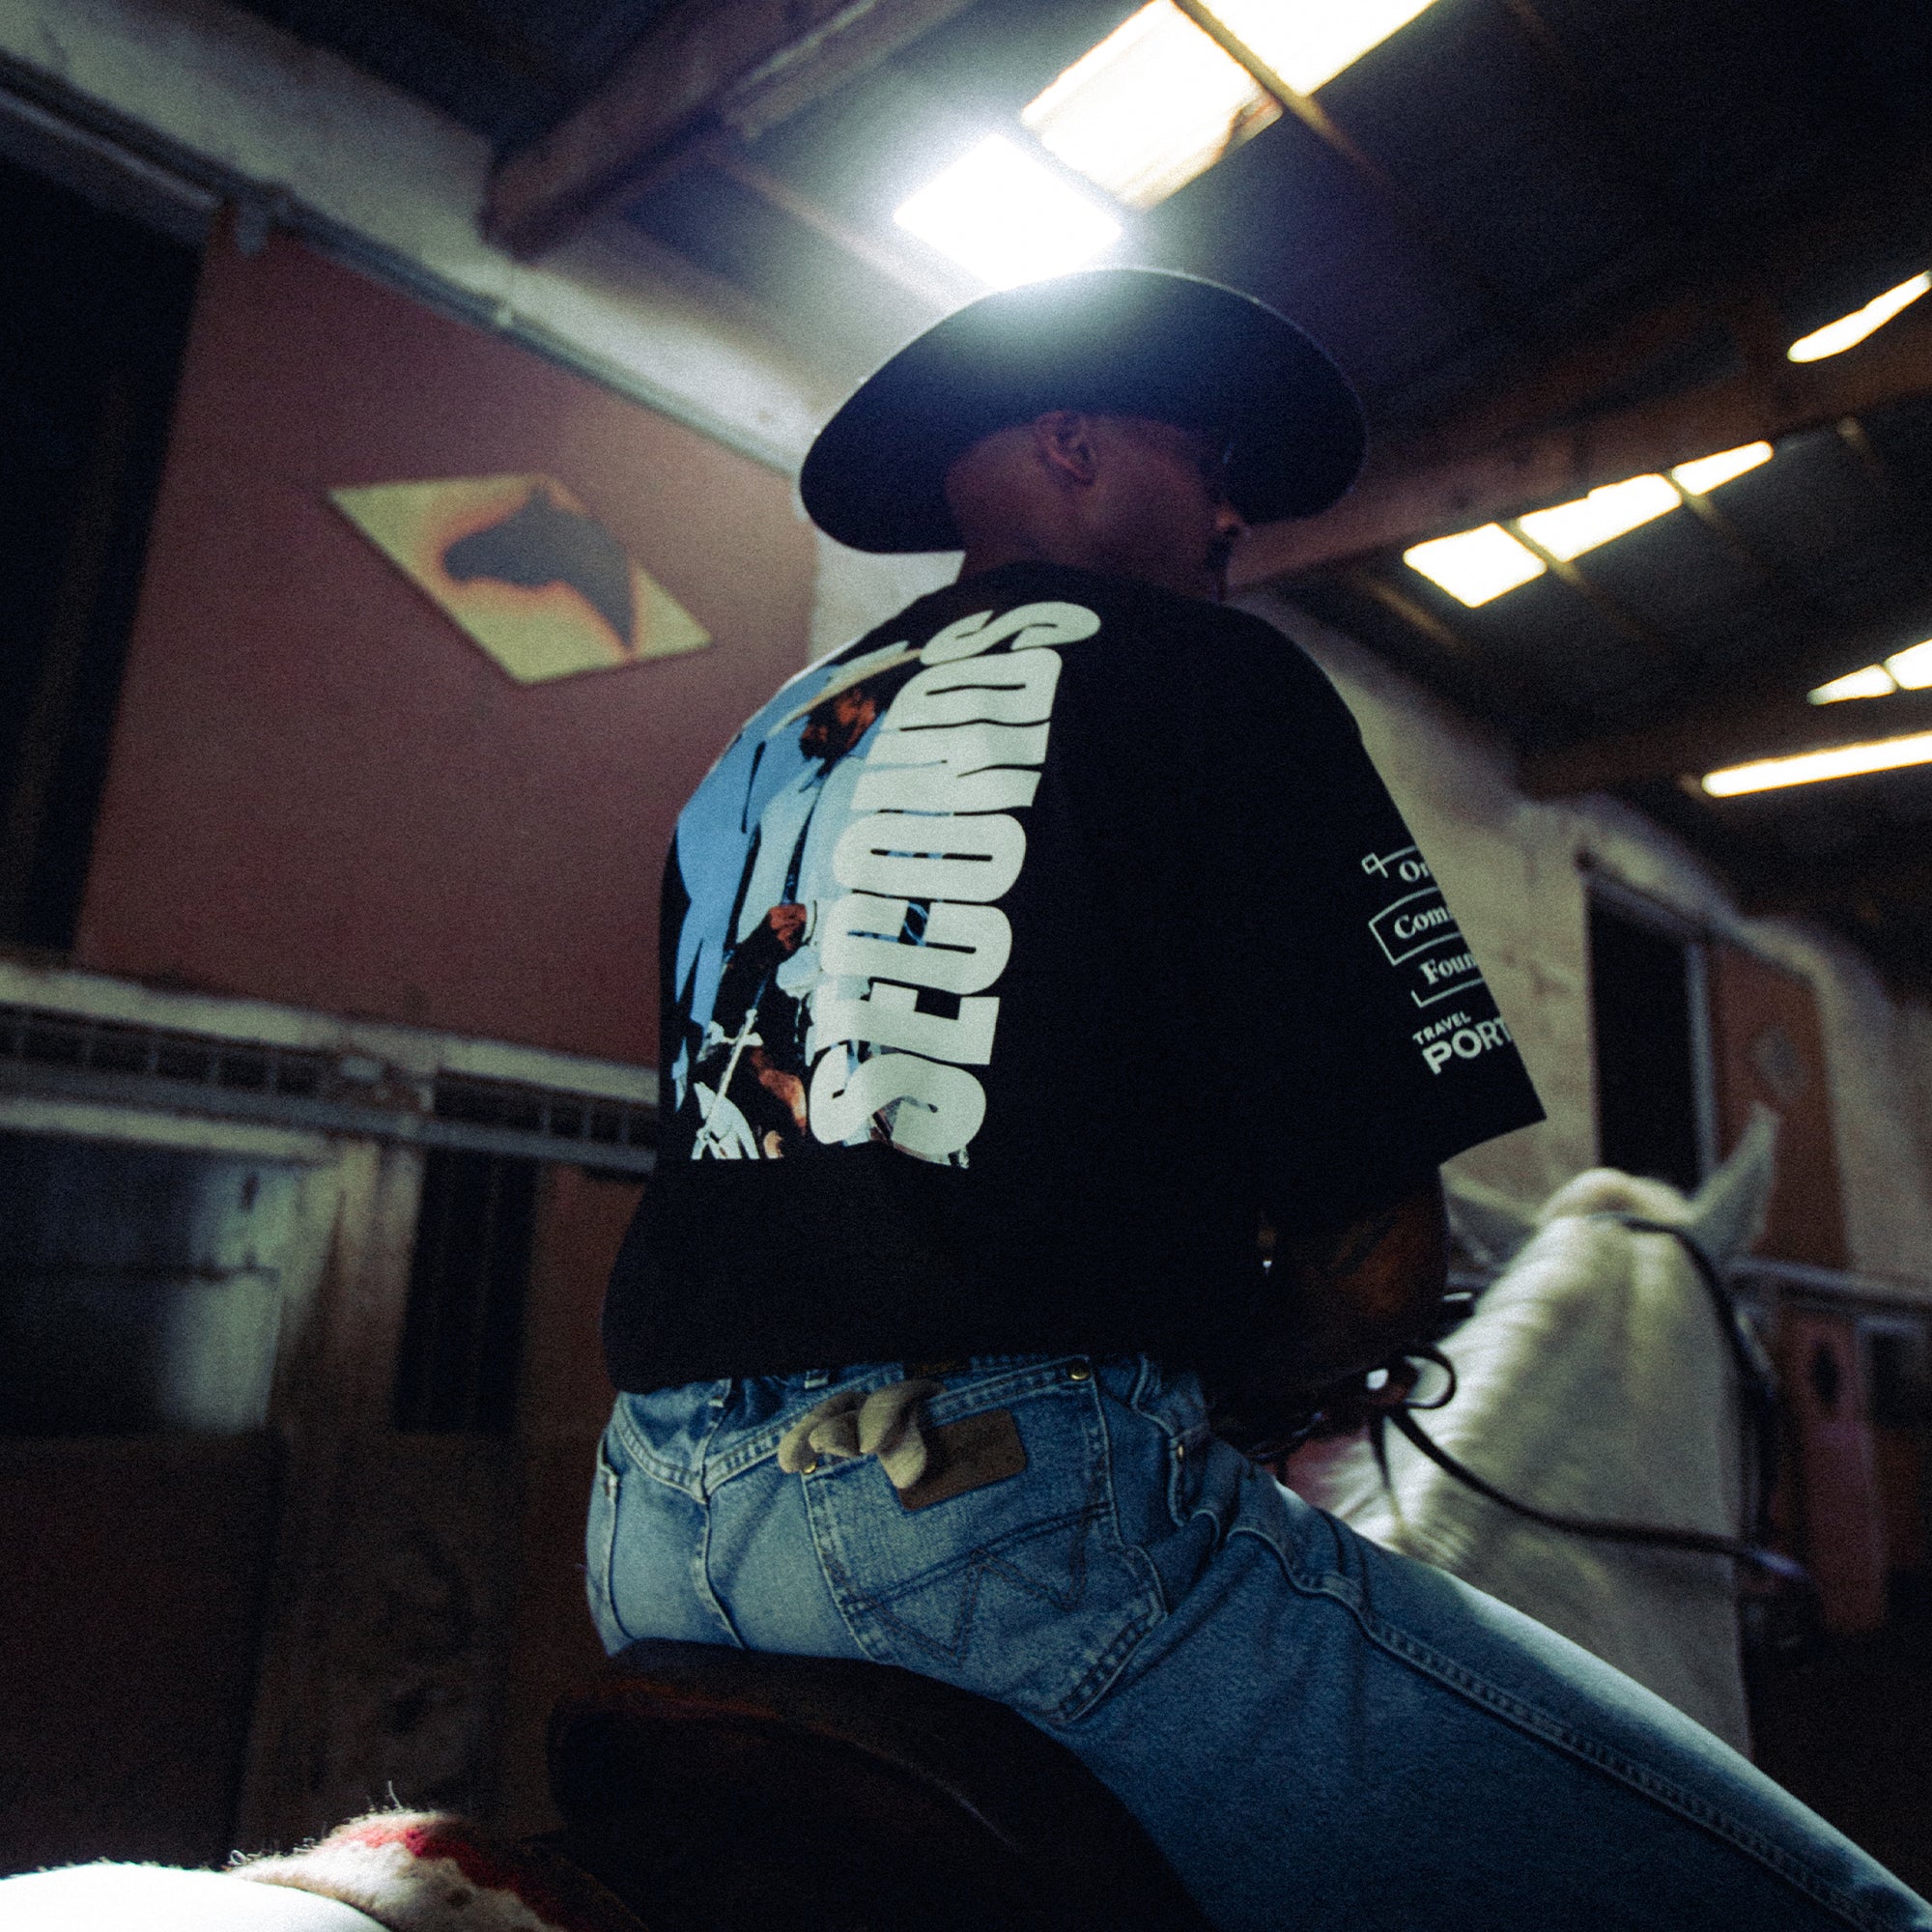 Eight Seconds Rodeo Tee